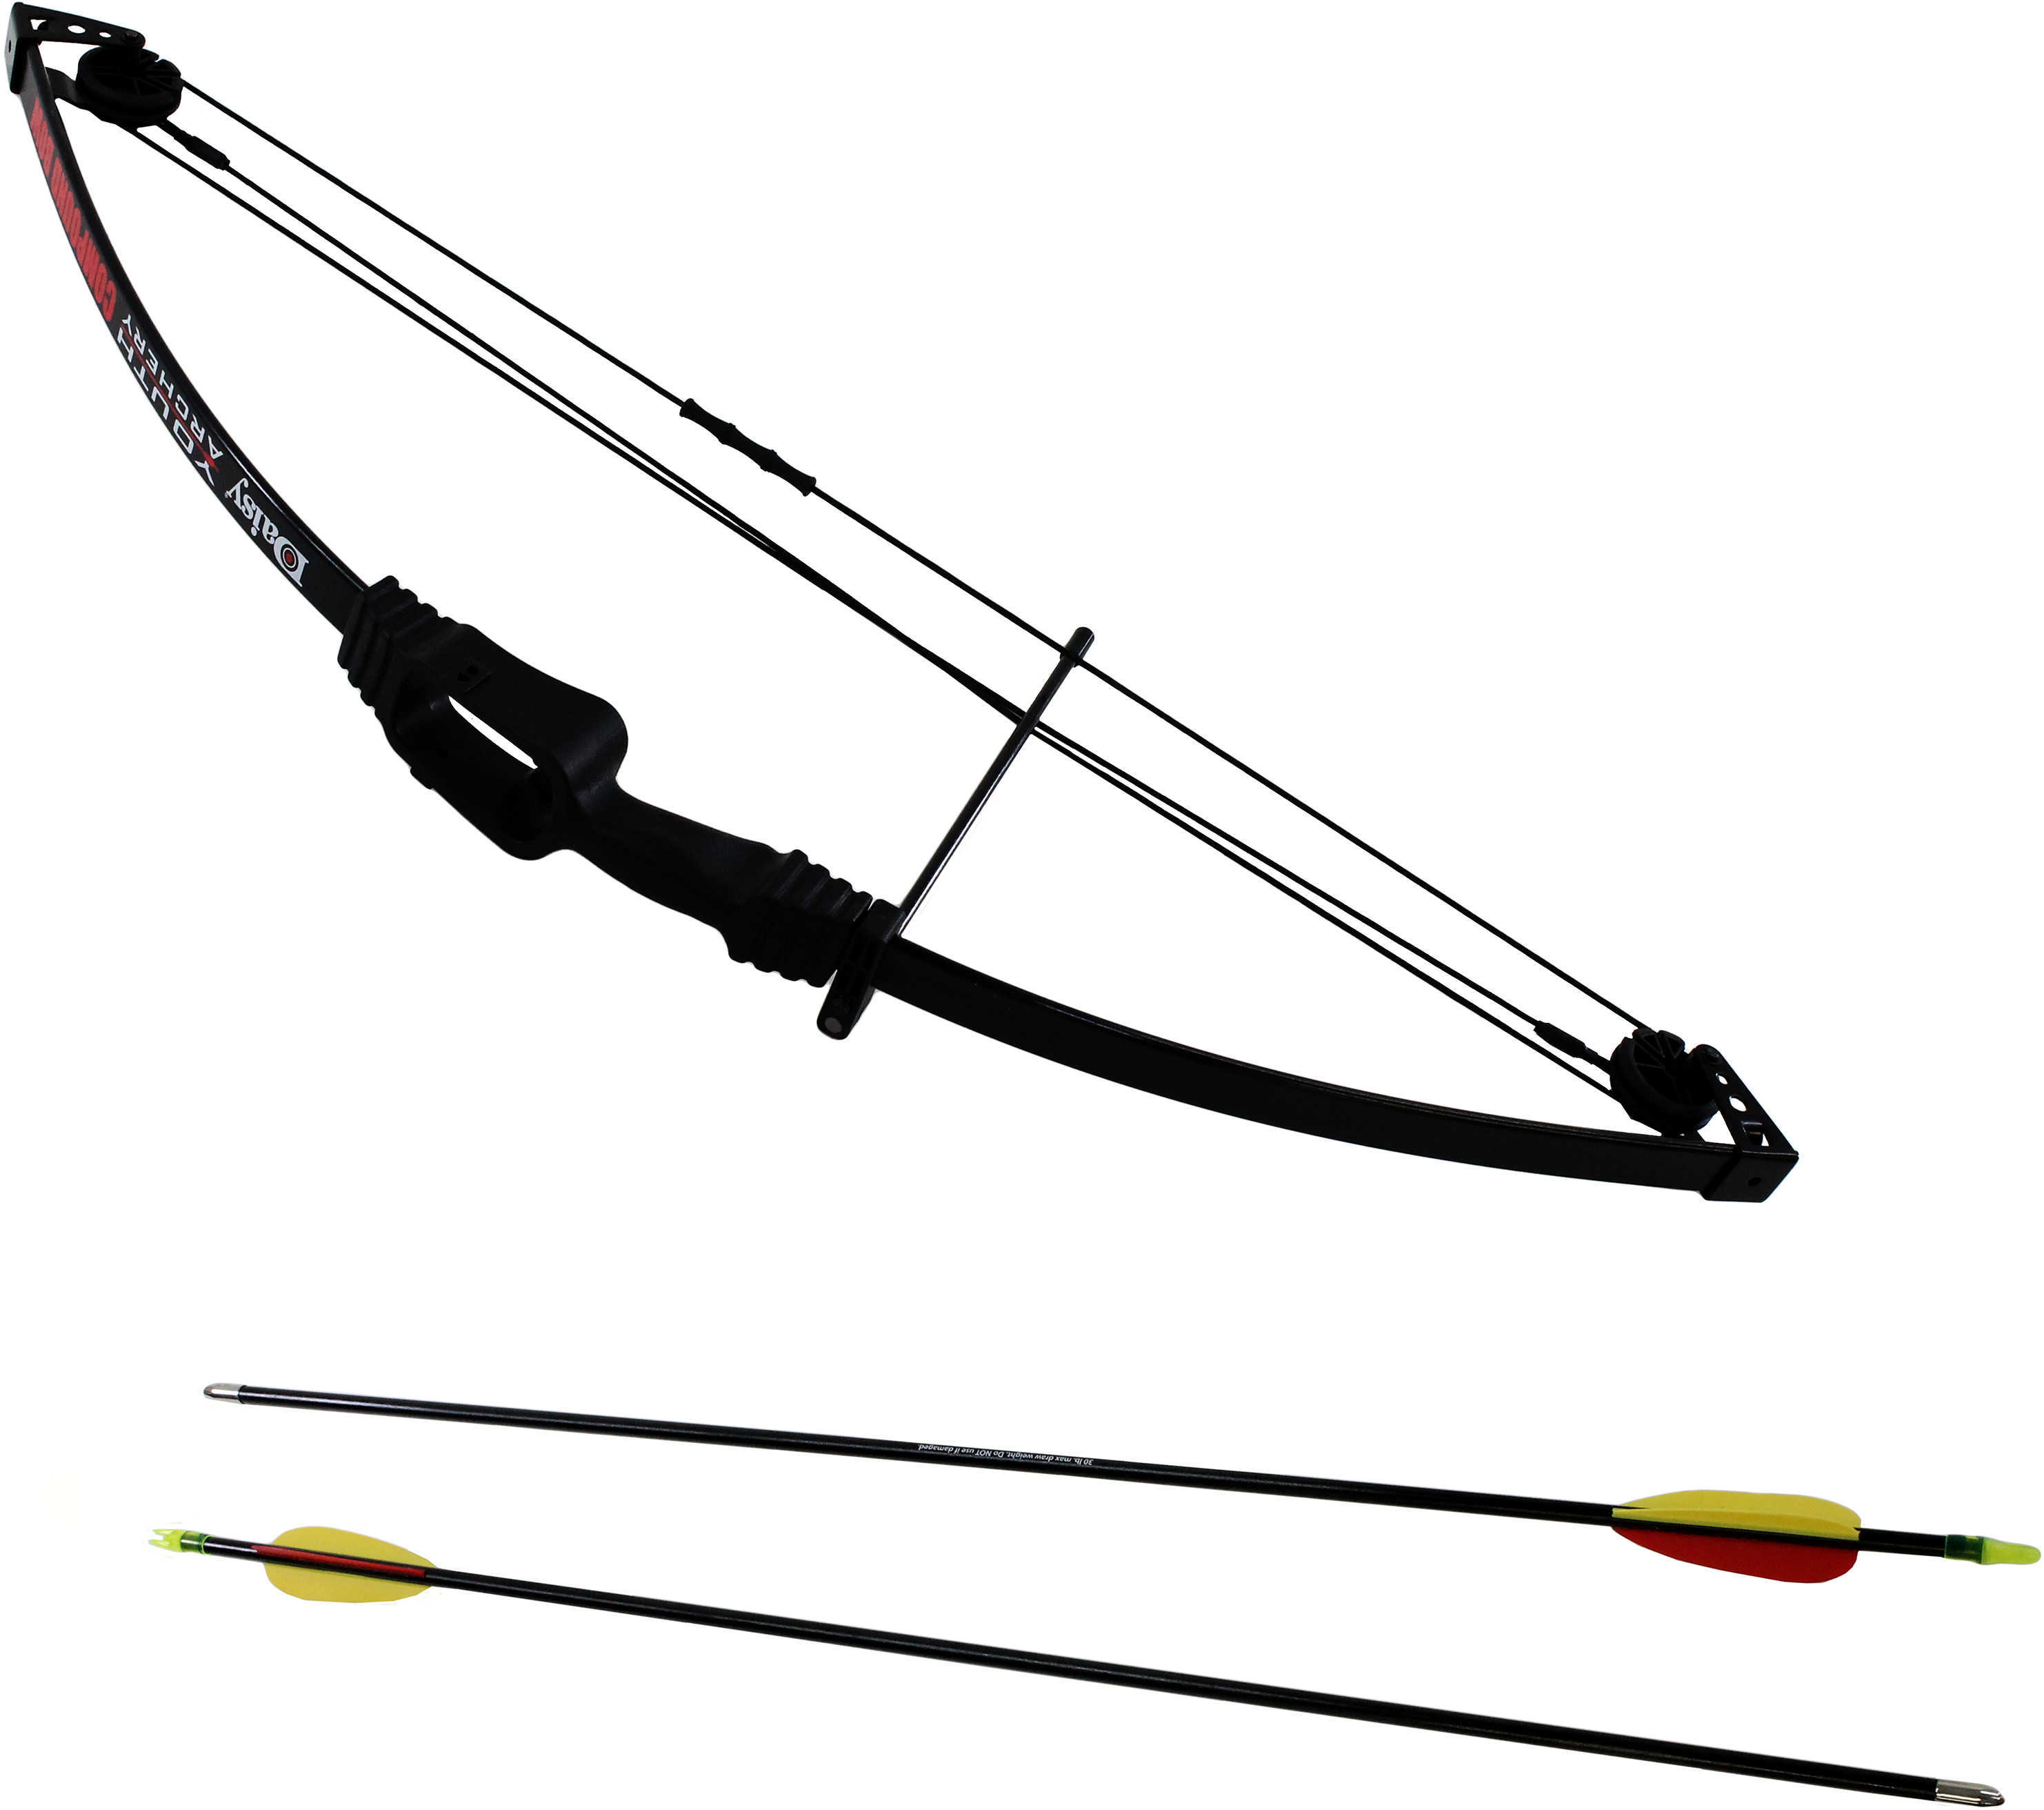 Daisy Outdoor Products Youth Compound Bow Model: 4002